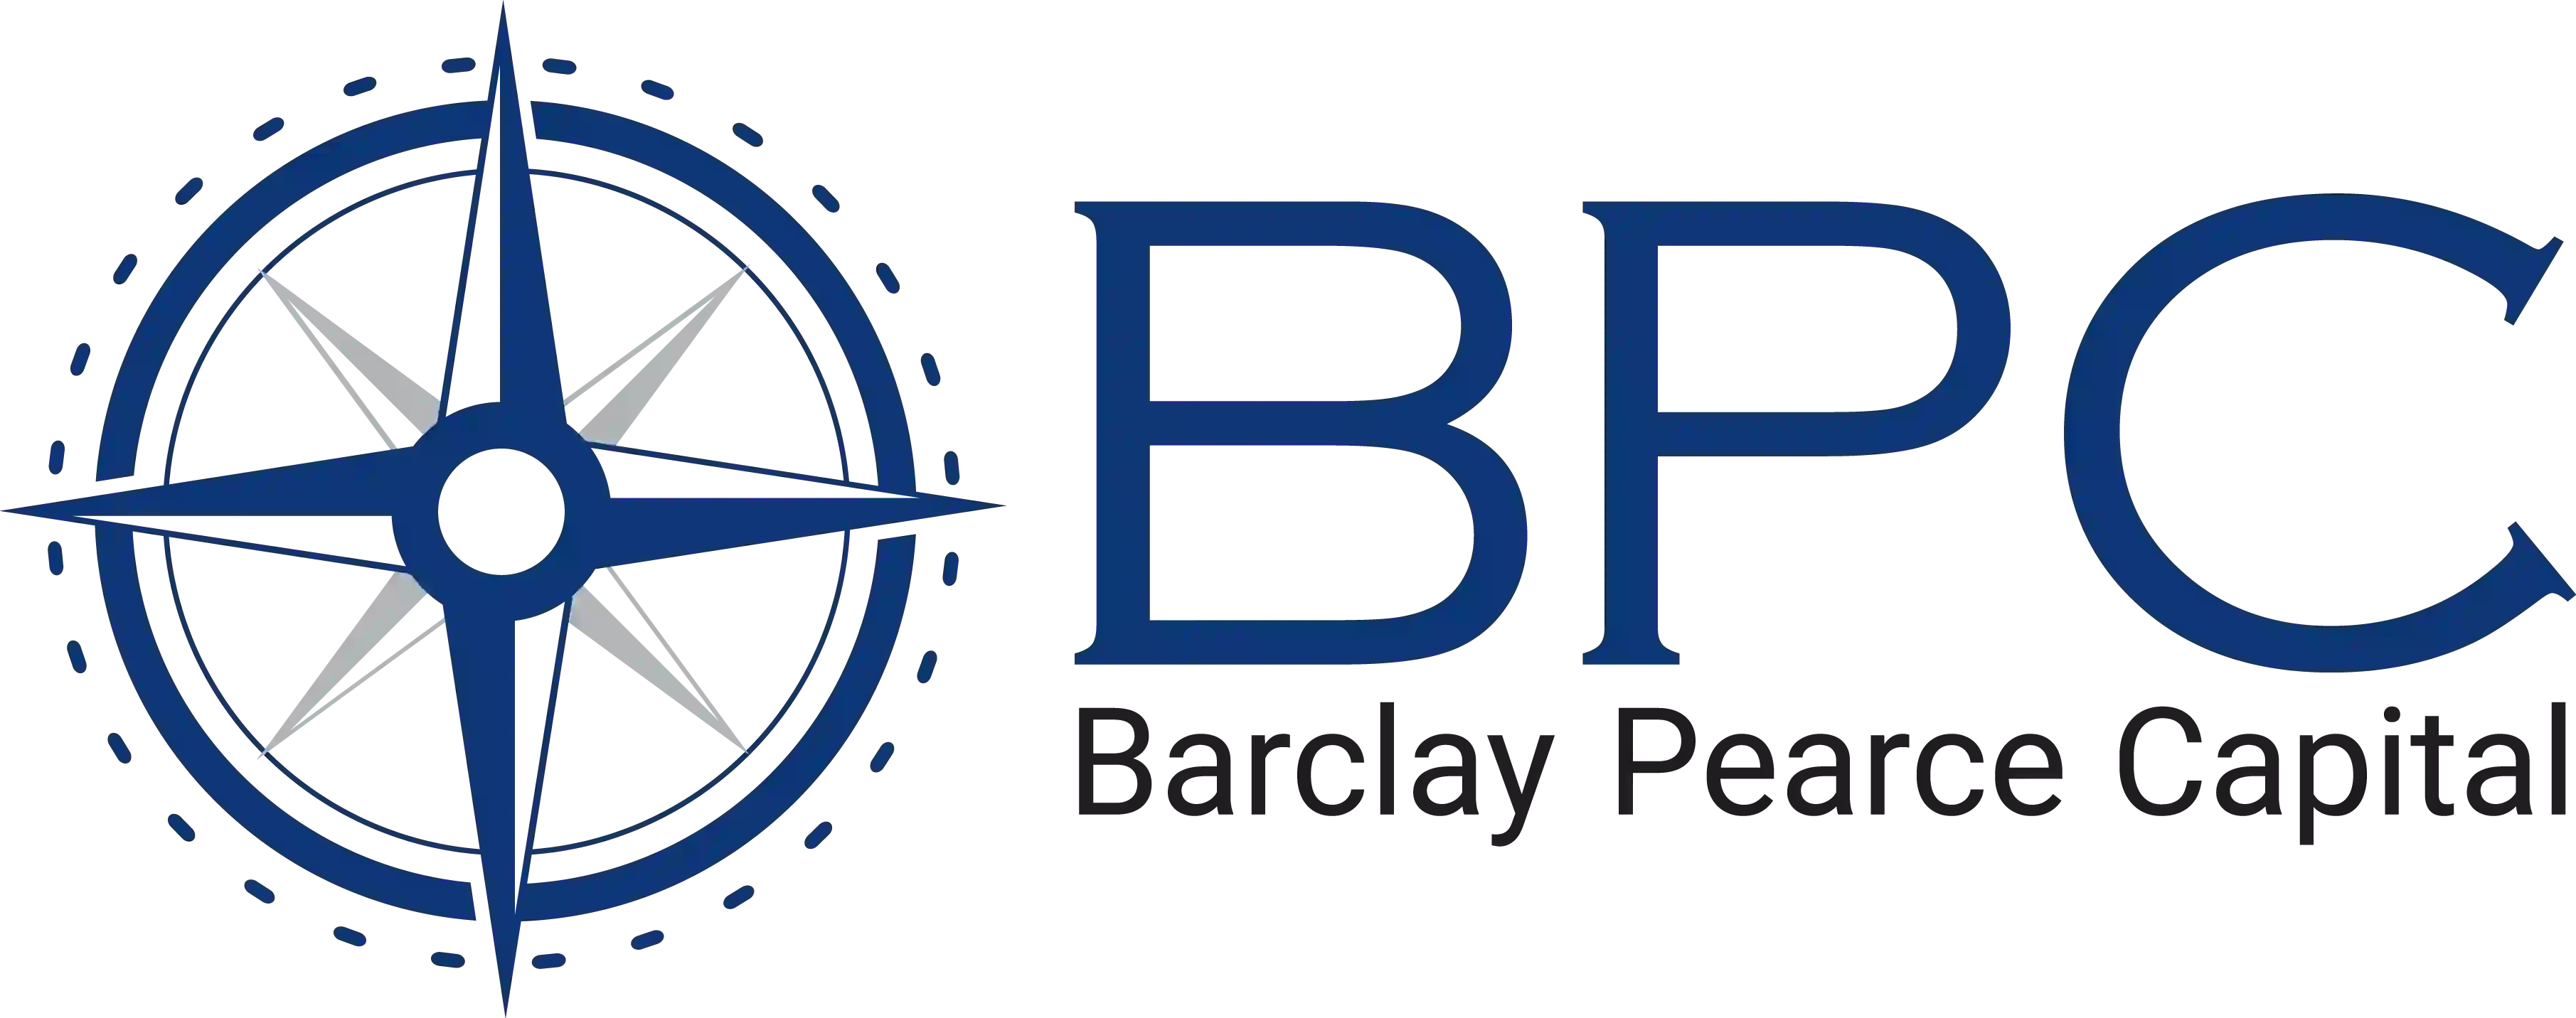 Barclays-Pearce-Capital-logo-compressed